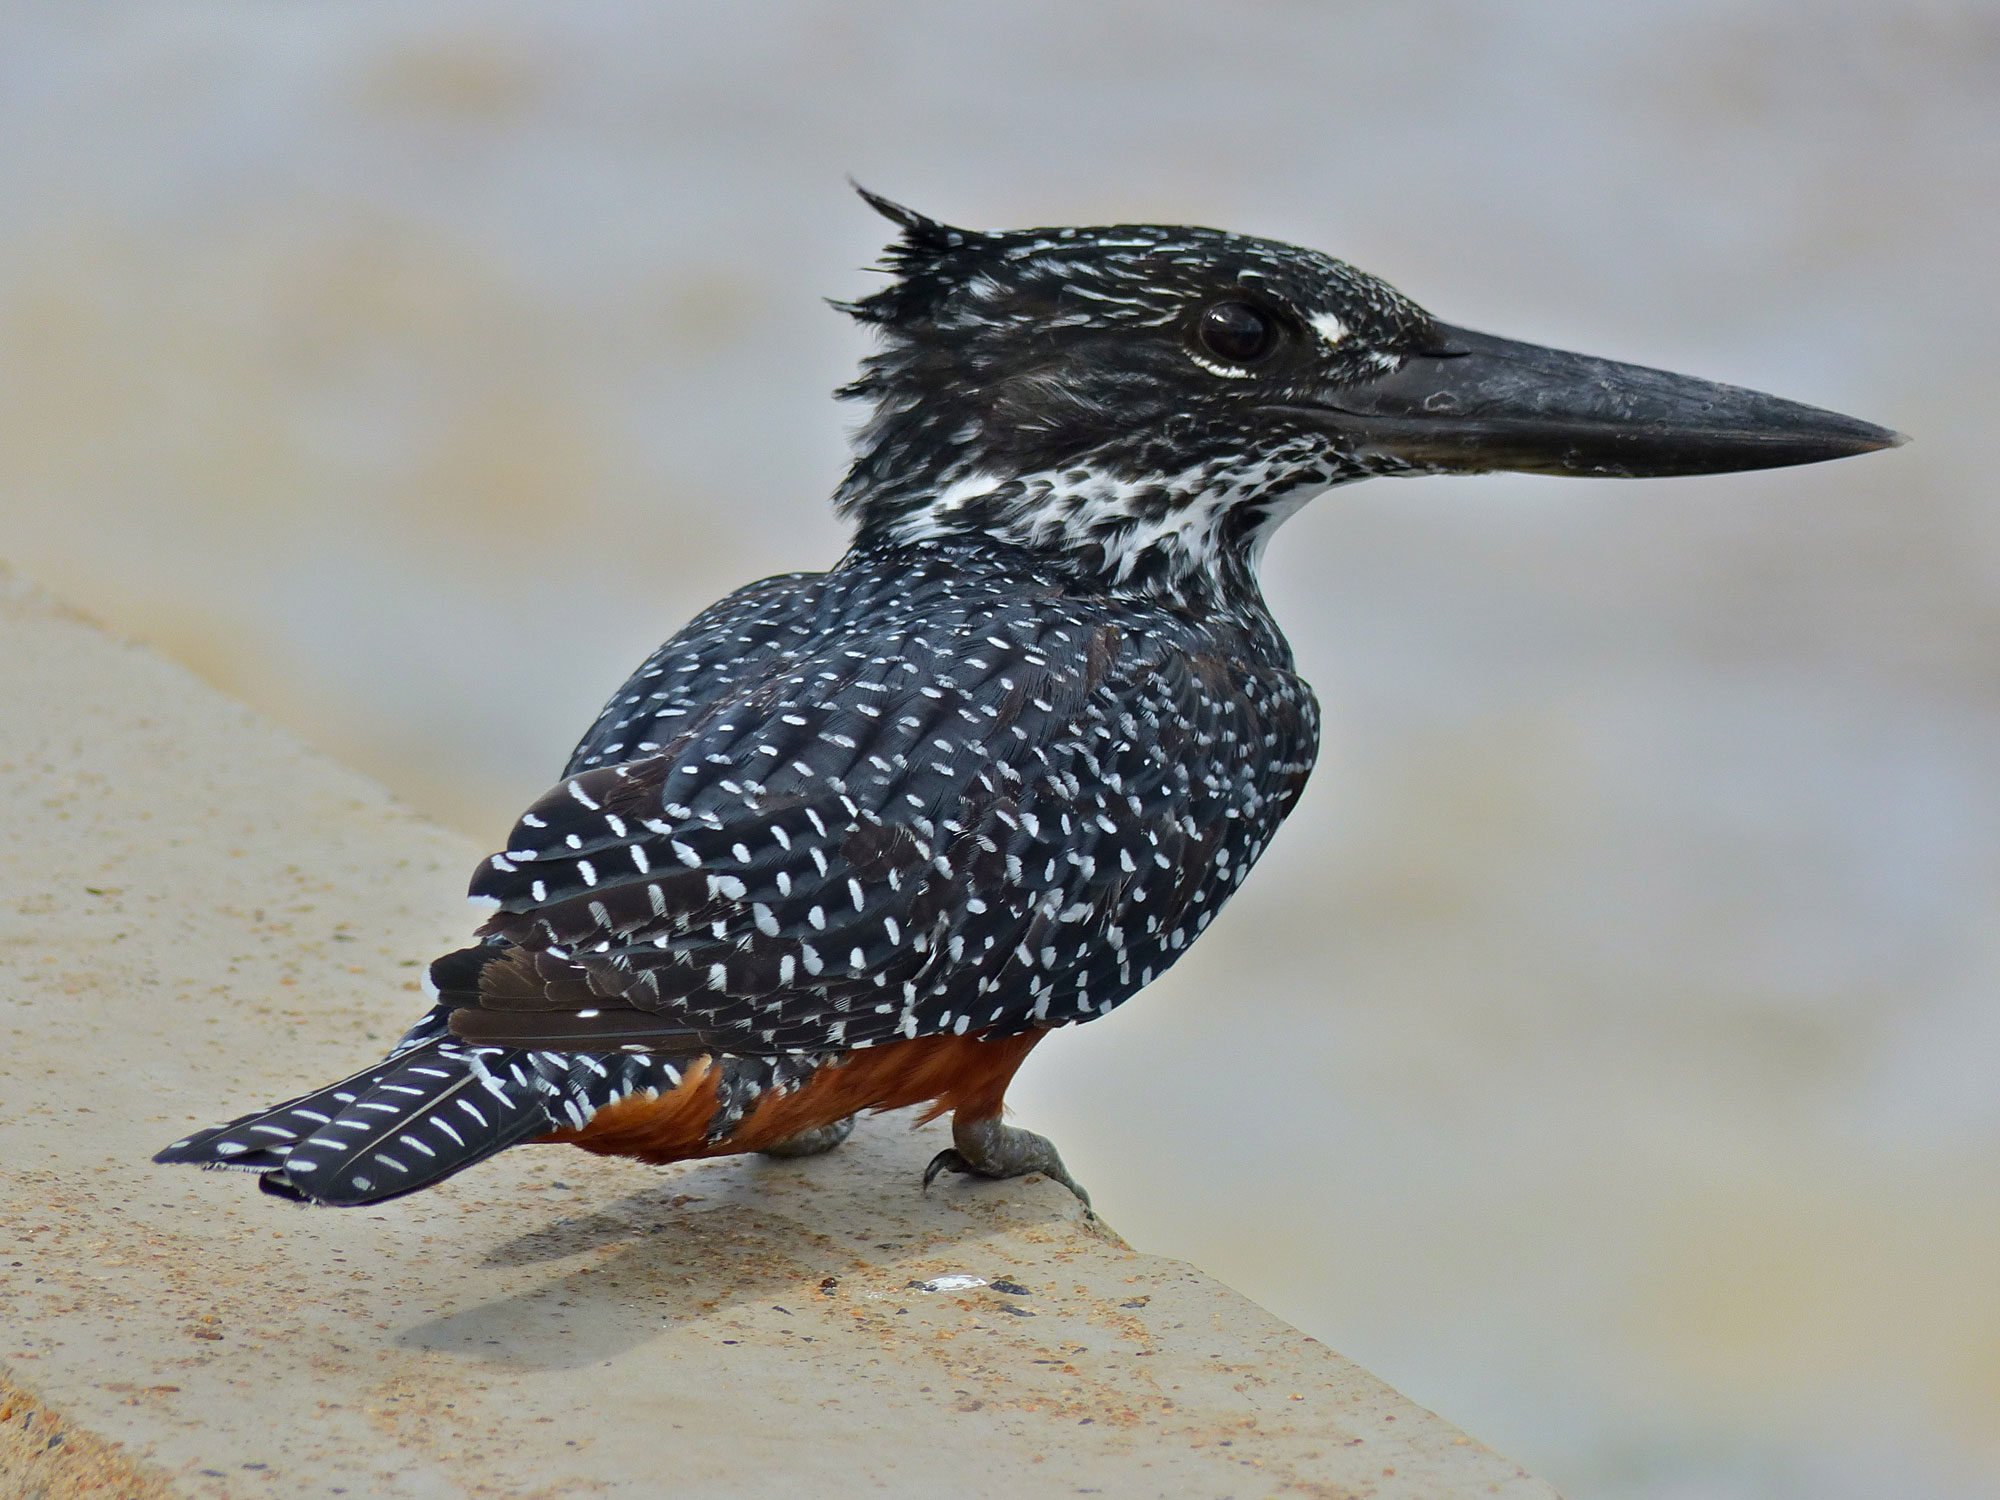 Photograph of a female giant kingfisher. The photo shows a black bird with white speckled pattern on its back and head. It has a large head and a large black beak. A little orange can be seen on its underside.